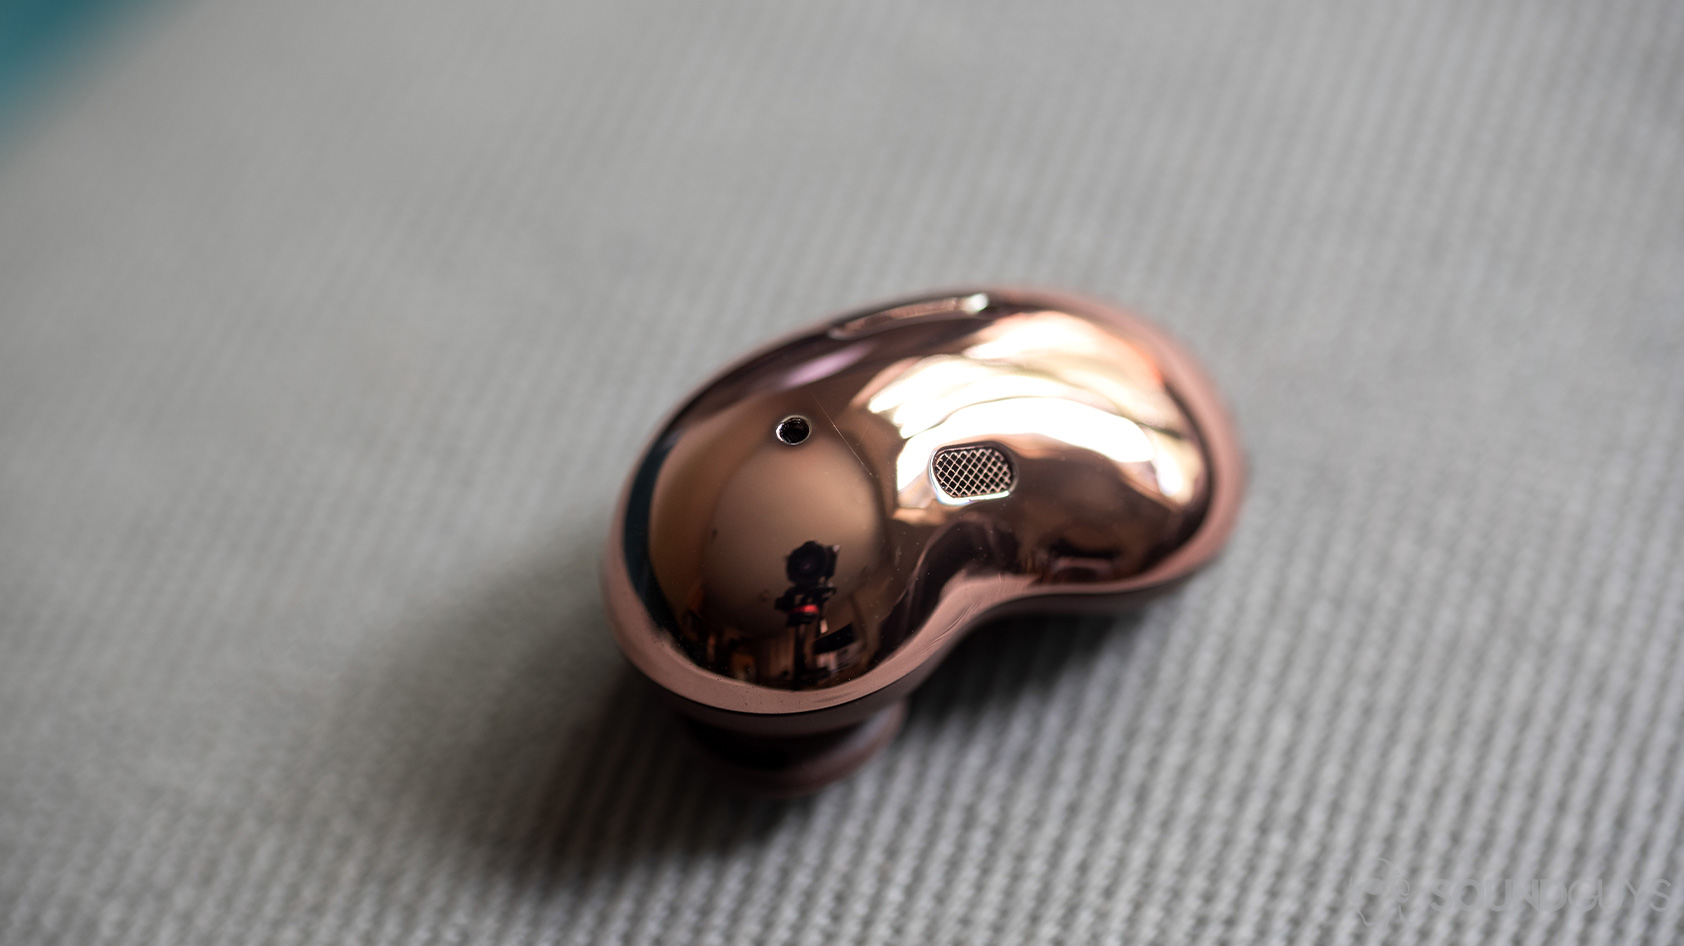 A picture of the Samsung Galaxy Buds Live noise canceling true wireless earbuds bean shaped, reflective exterior; the earbud is at angle.